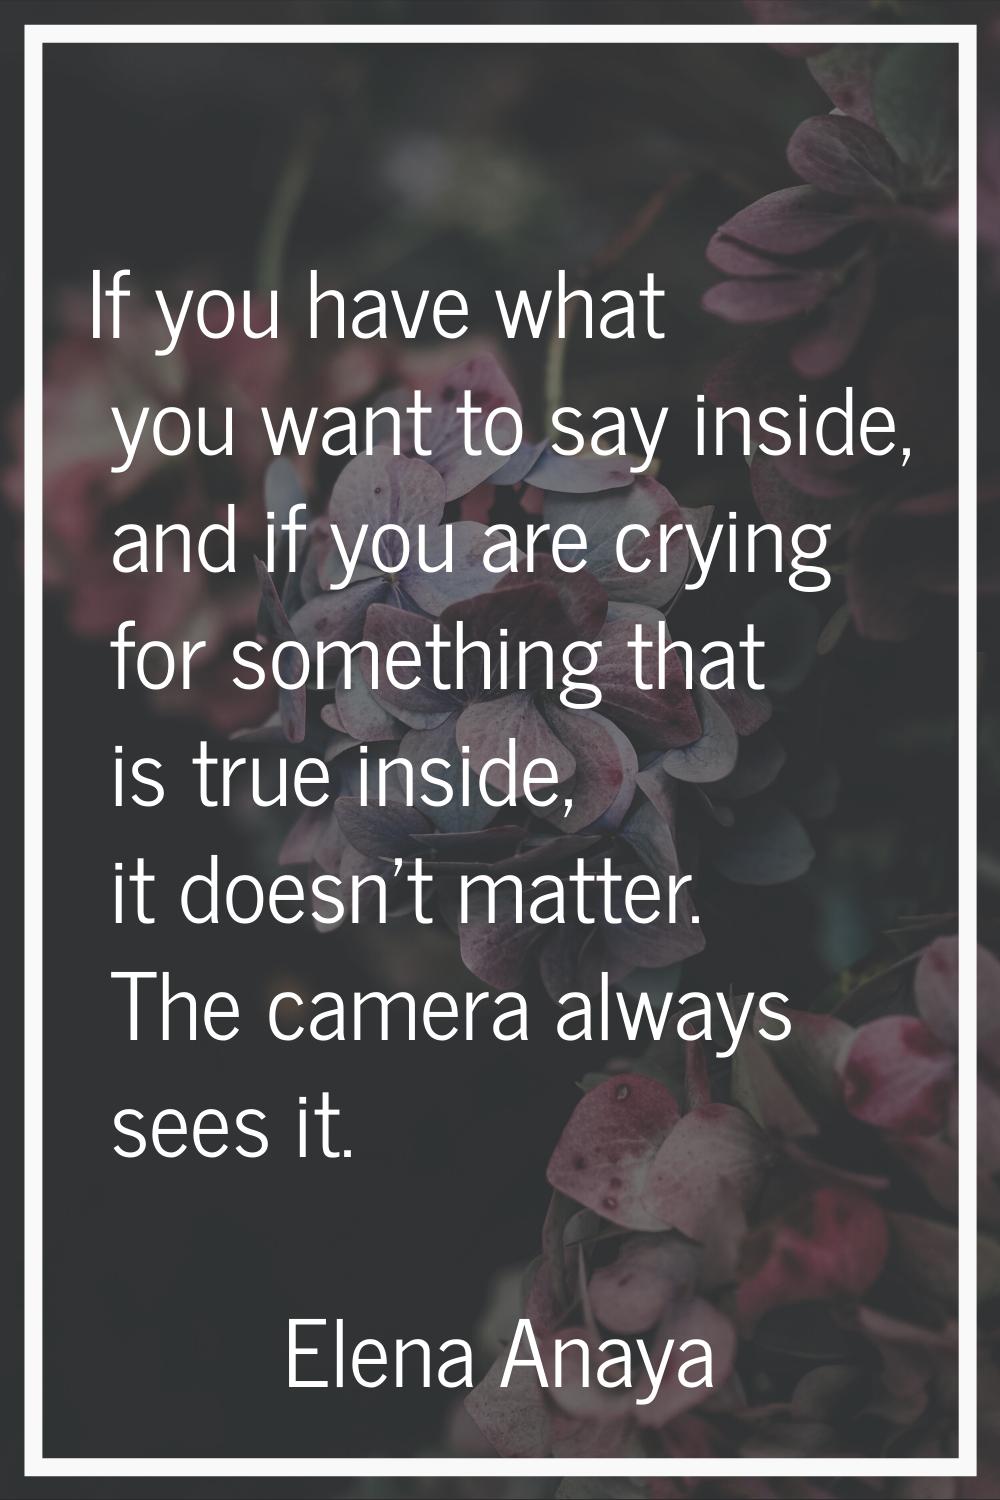 If you have what you want to say inside, and if you are crying for something that is true inside, i